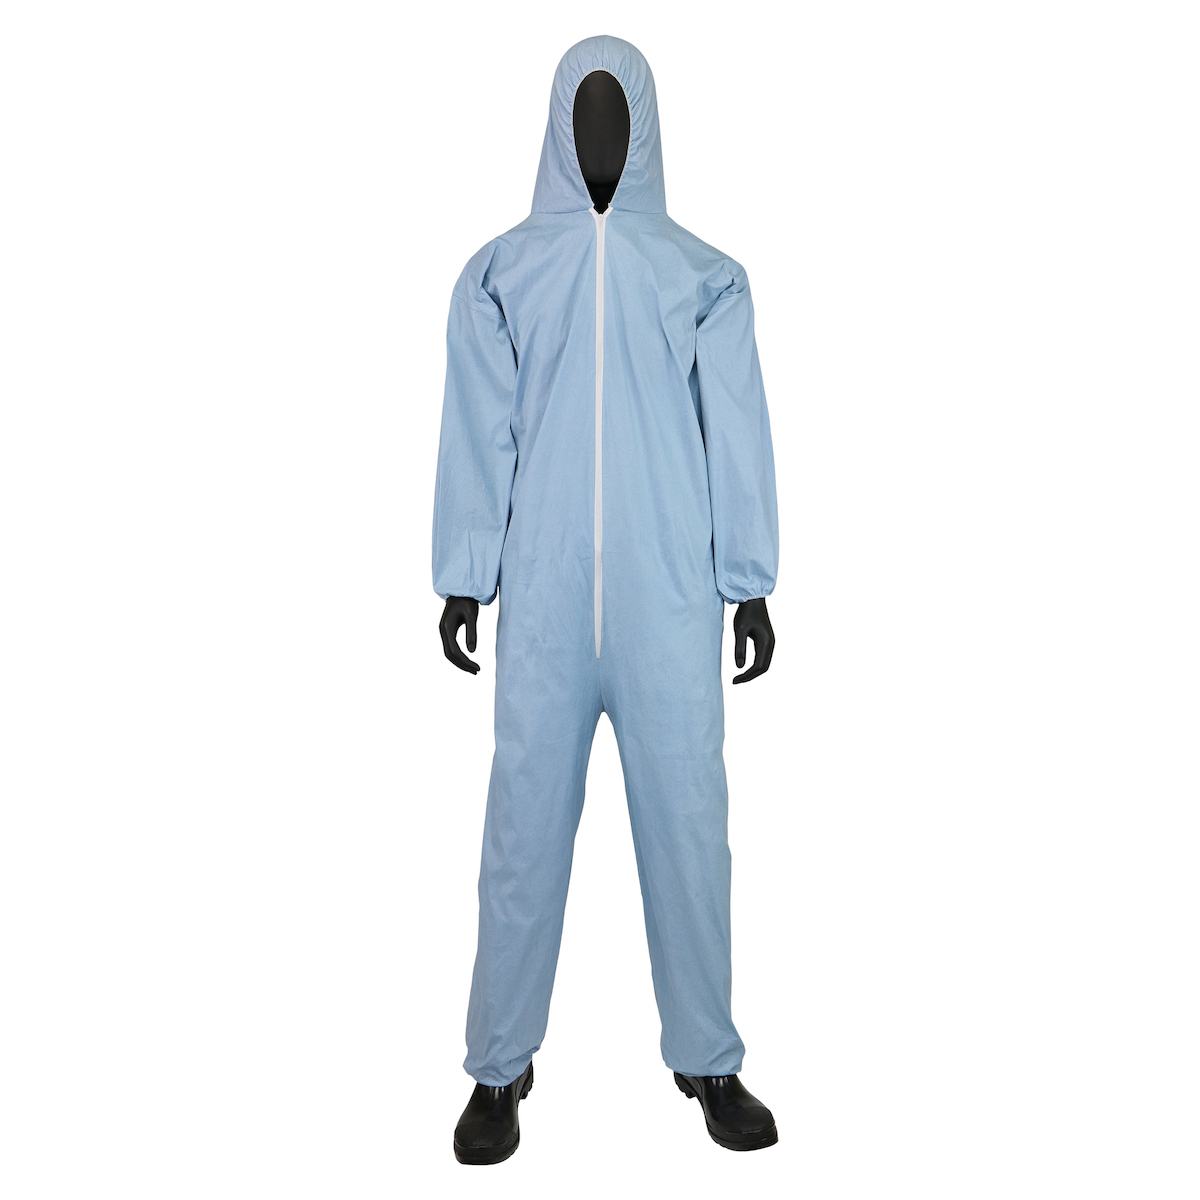 Posi-Wear® FR™ Flame Resistant Coverall with Hood, Elastic Wrists and Ankles